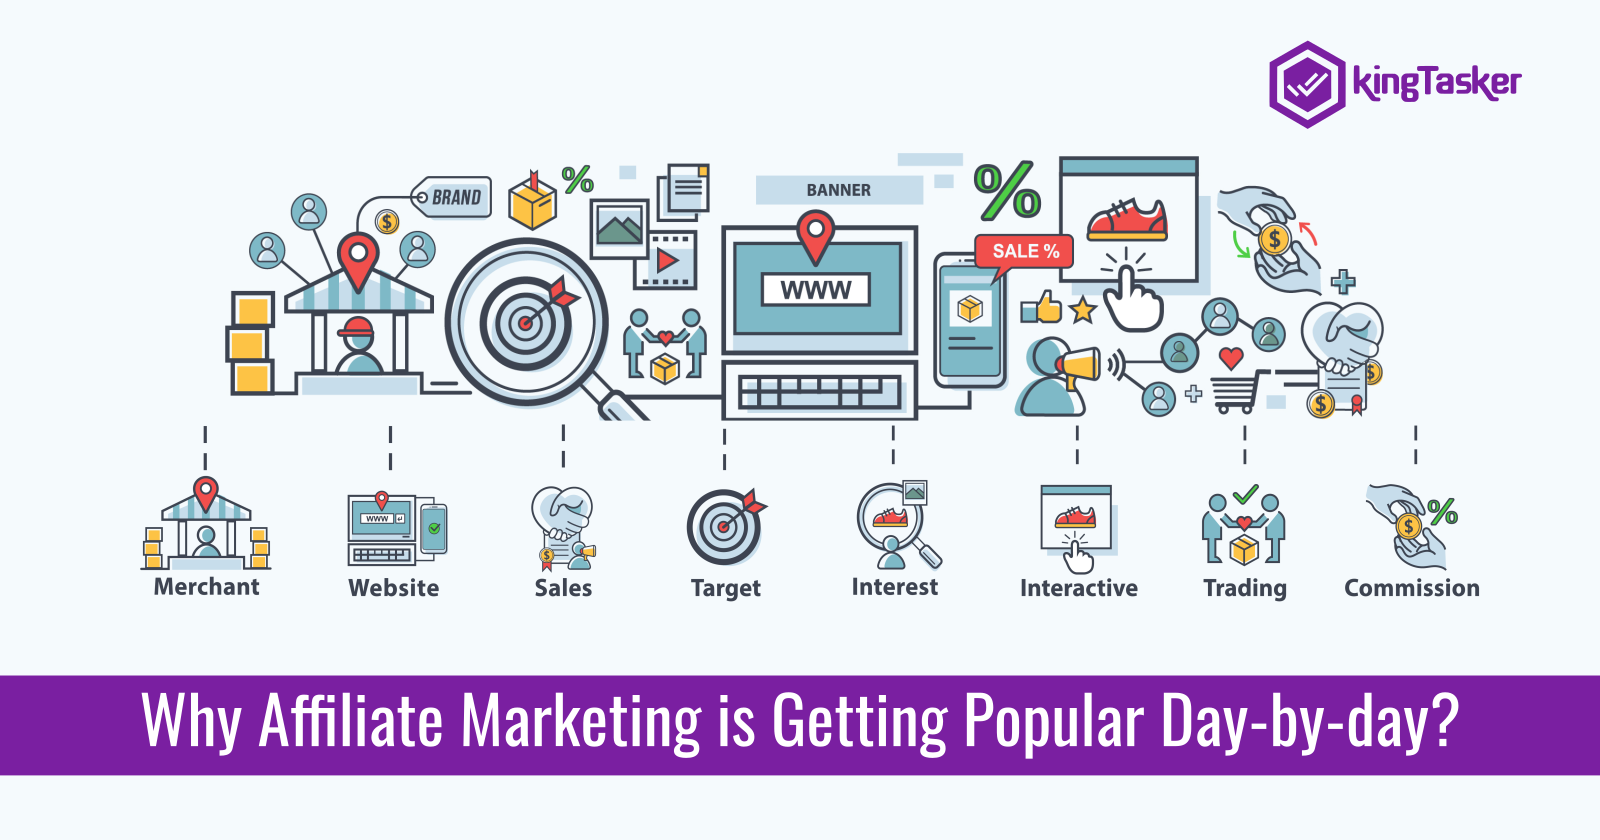 Why Affiliate Marketing is Getting Popular Day-by-day?